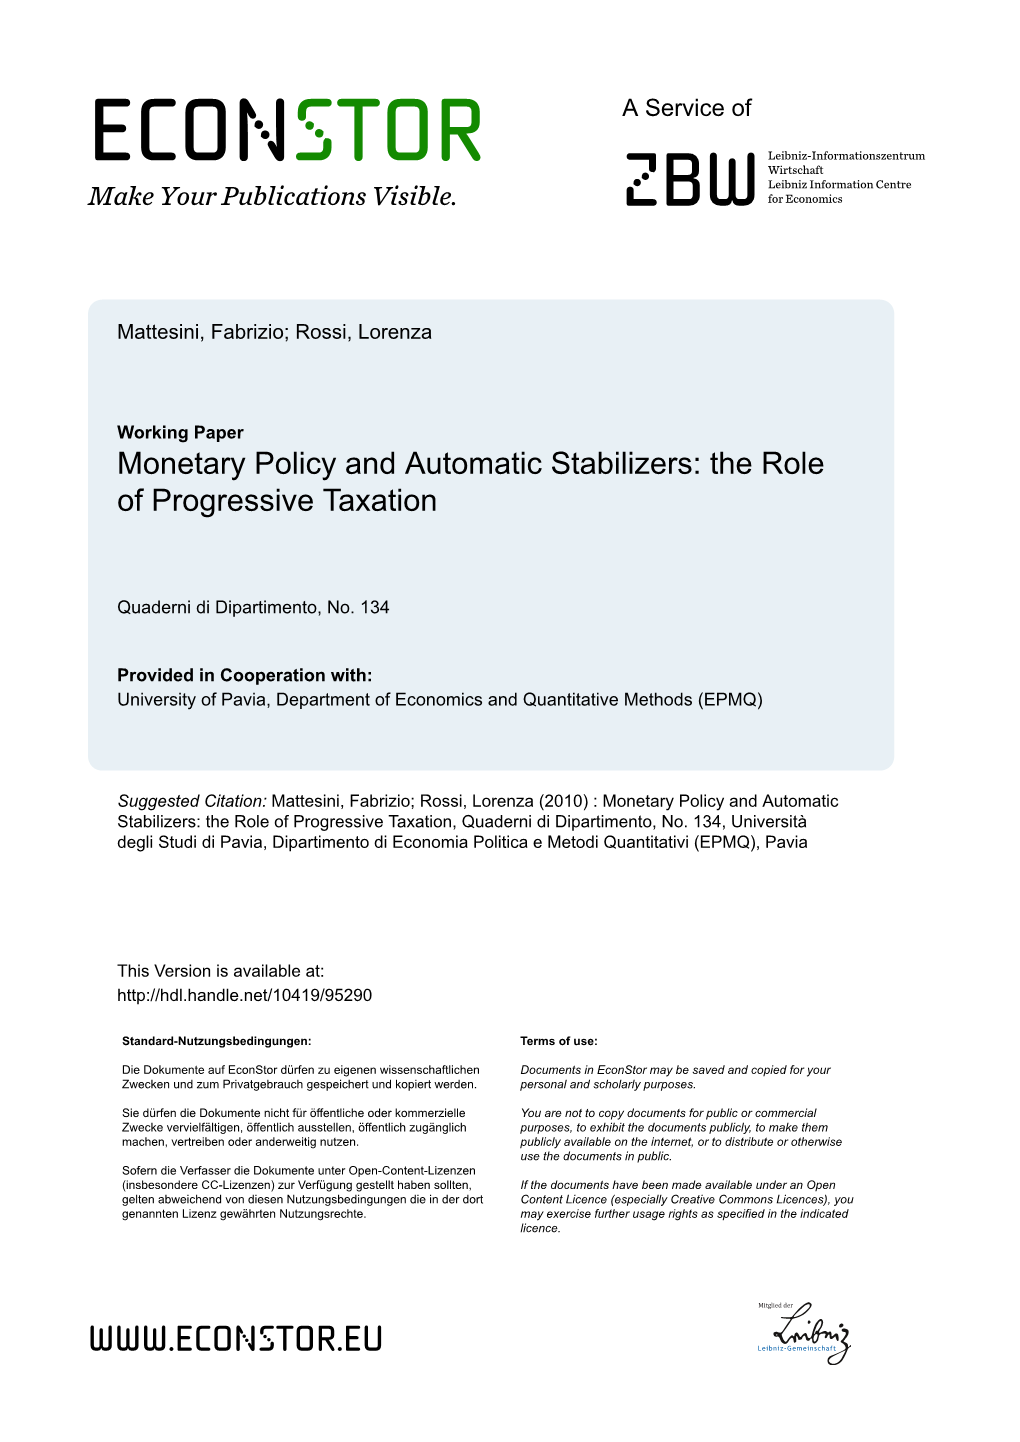 Monetary Policy and Automatic Stabilizers: the Role of Progressive Taxation